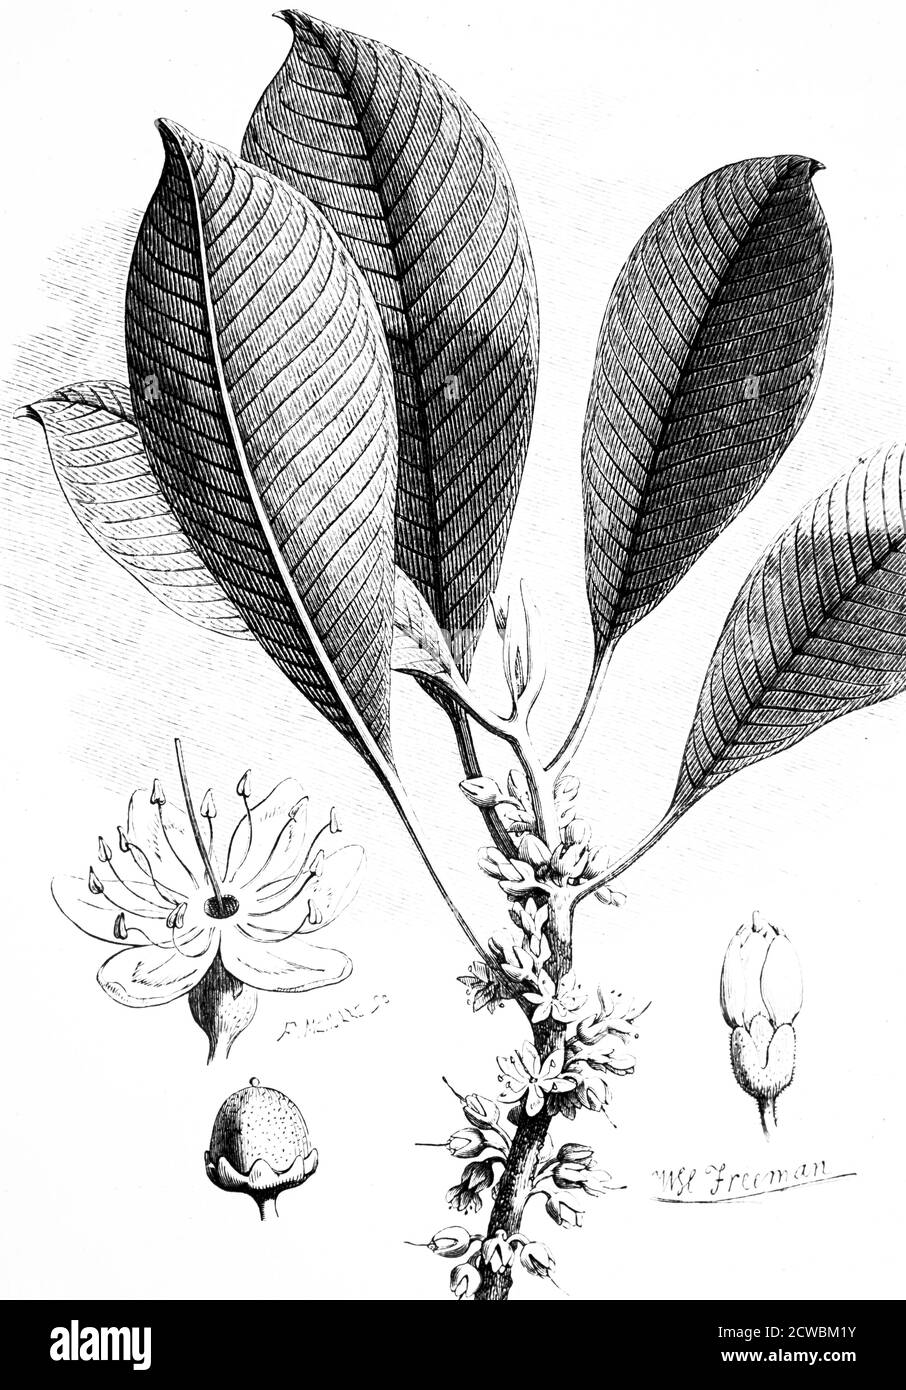 Engraving depicting a twig of a gutta-percha tree showing a bud, flower and fruit. Stock Photo